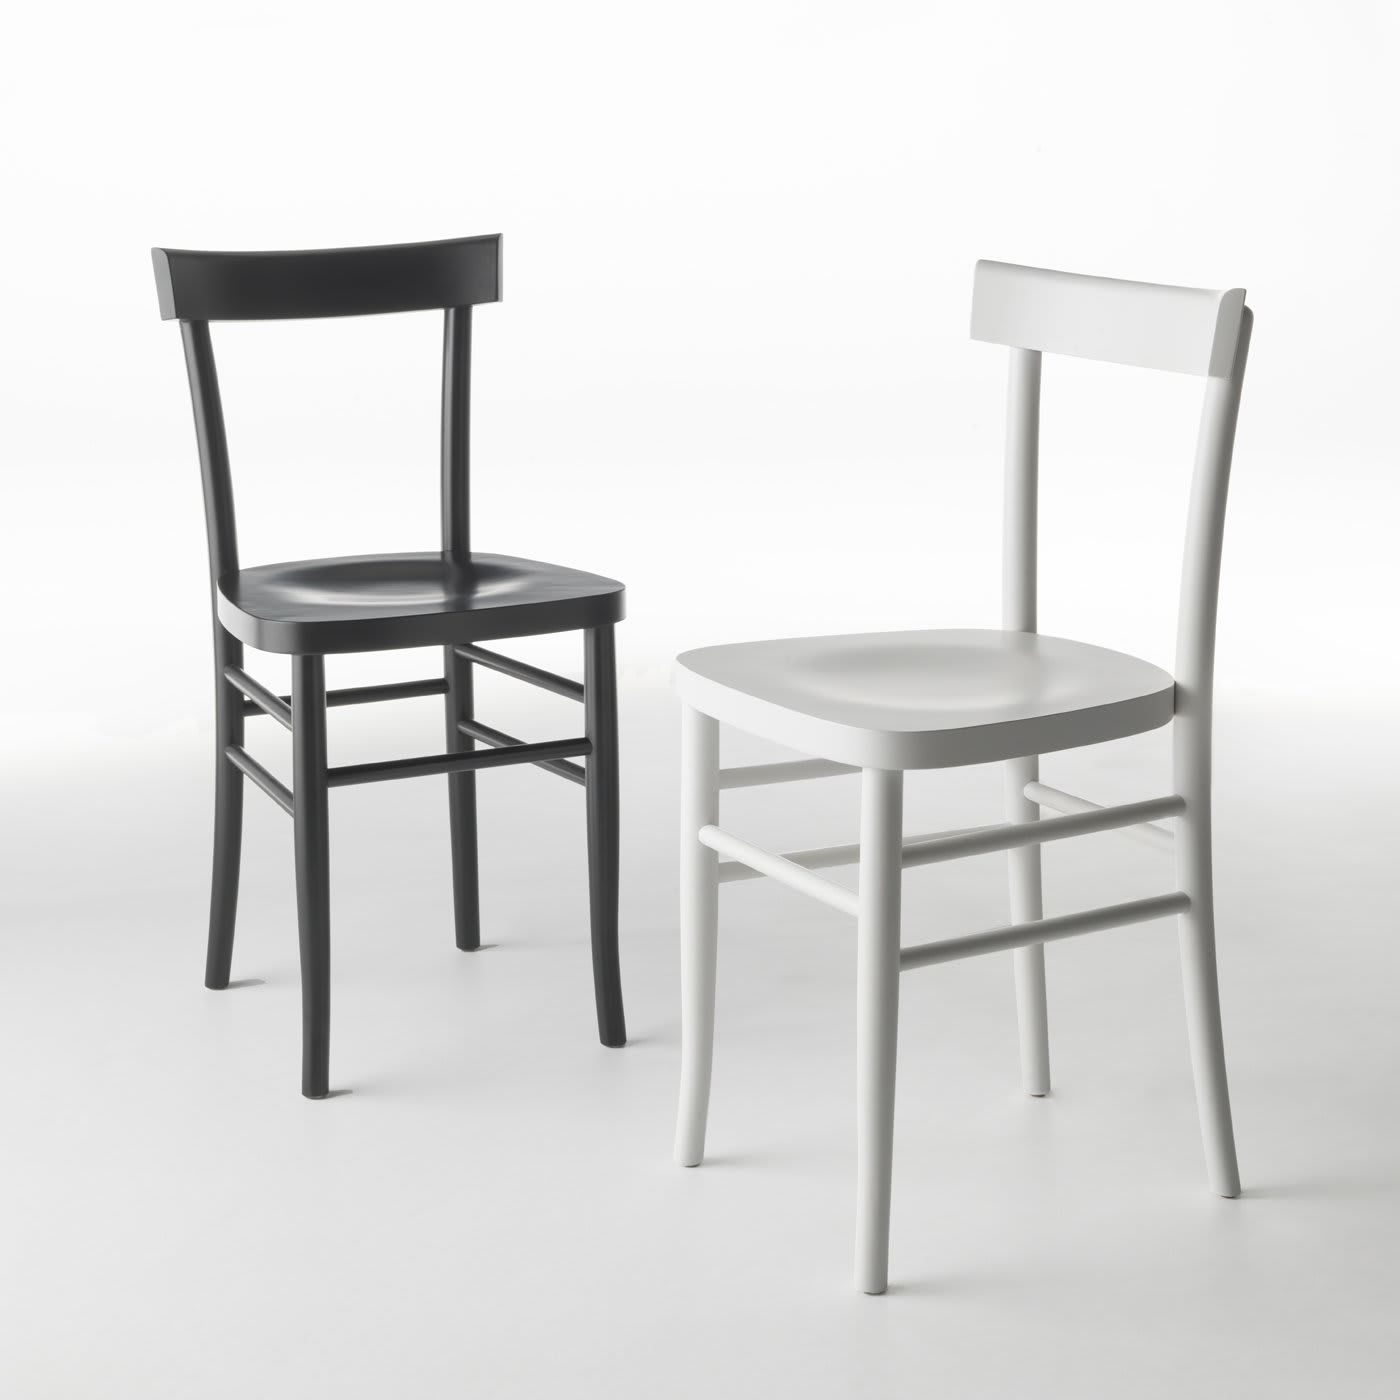 Set of 2 Cherish Black Chairs by StH - Horm